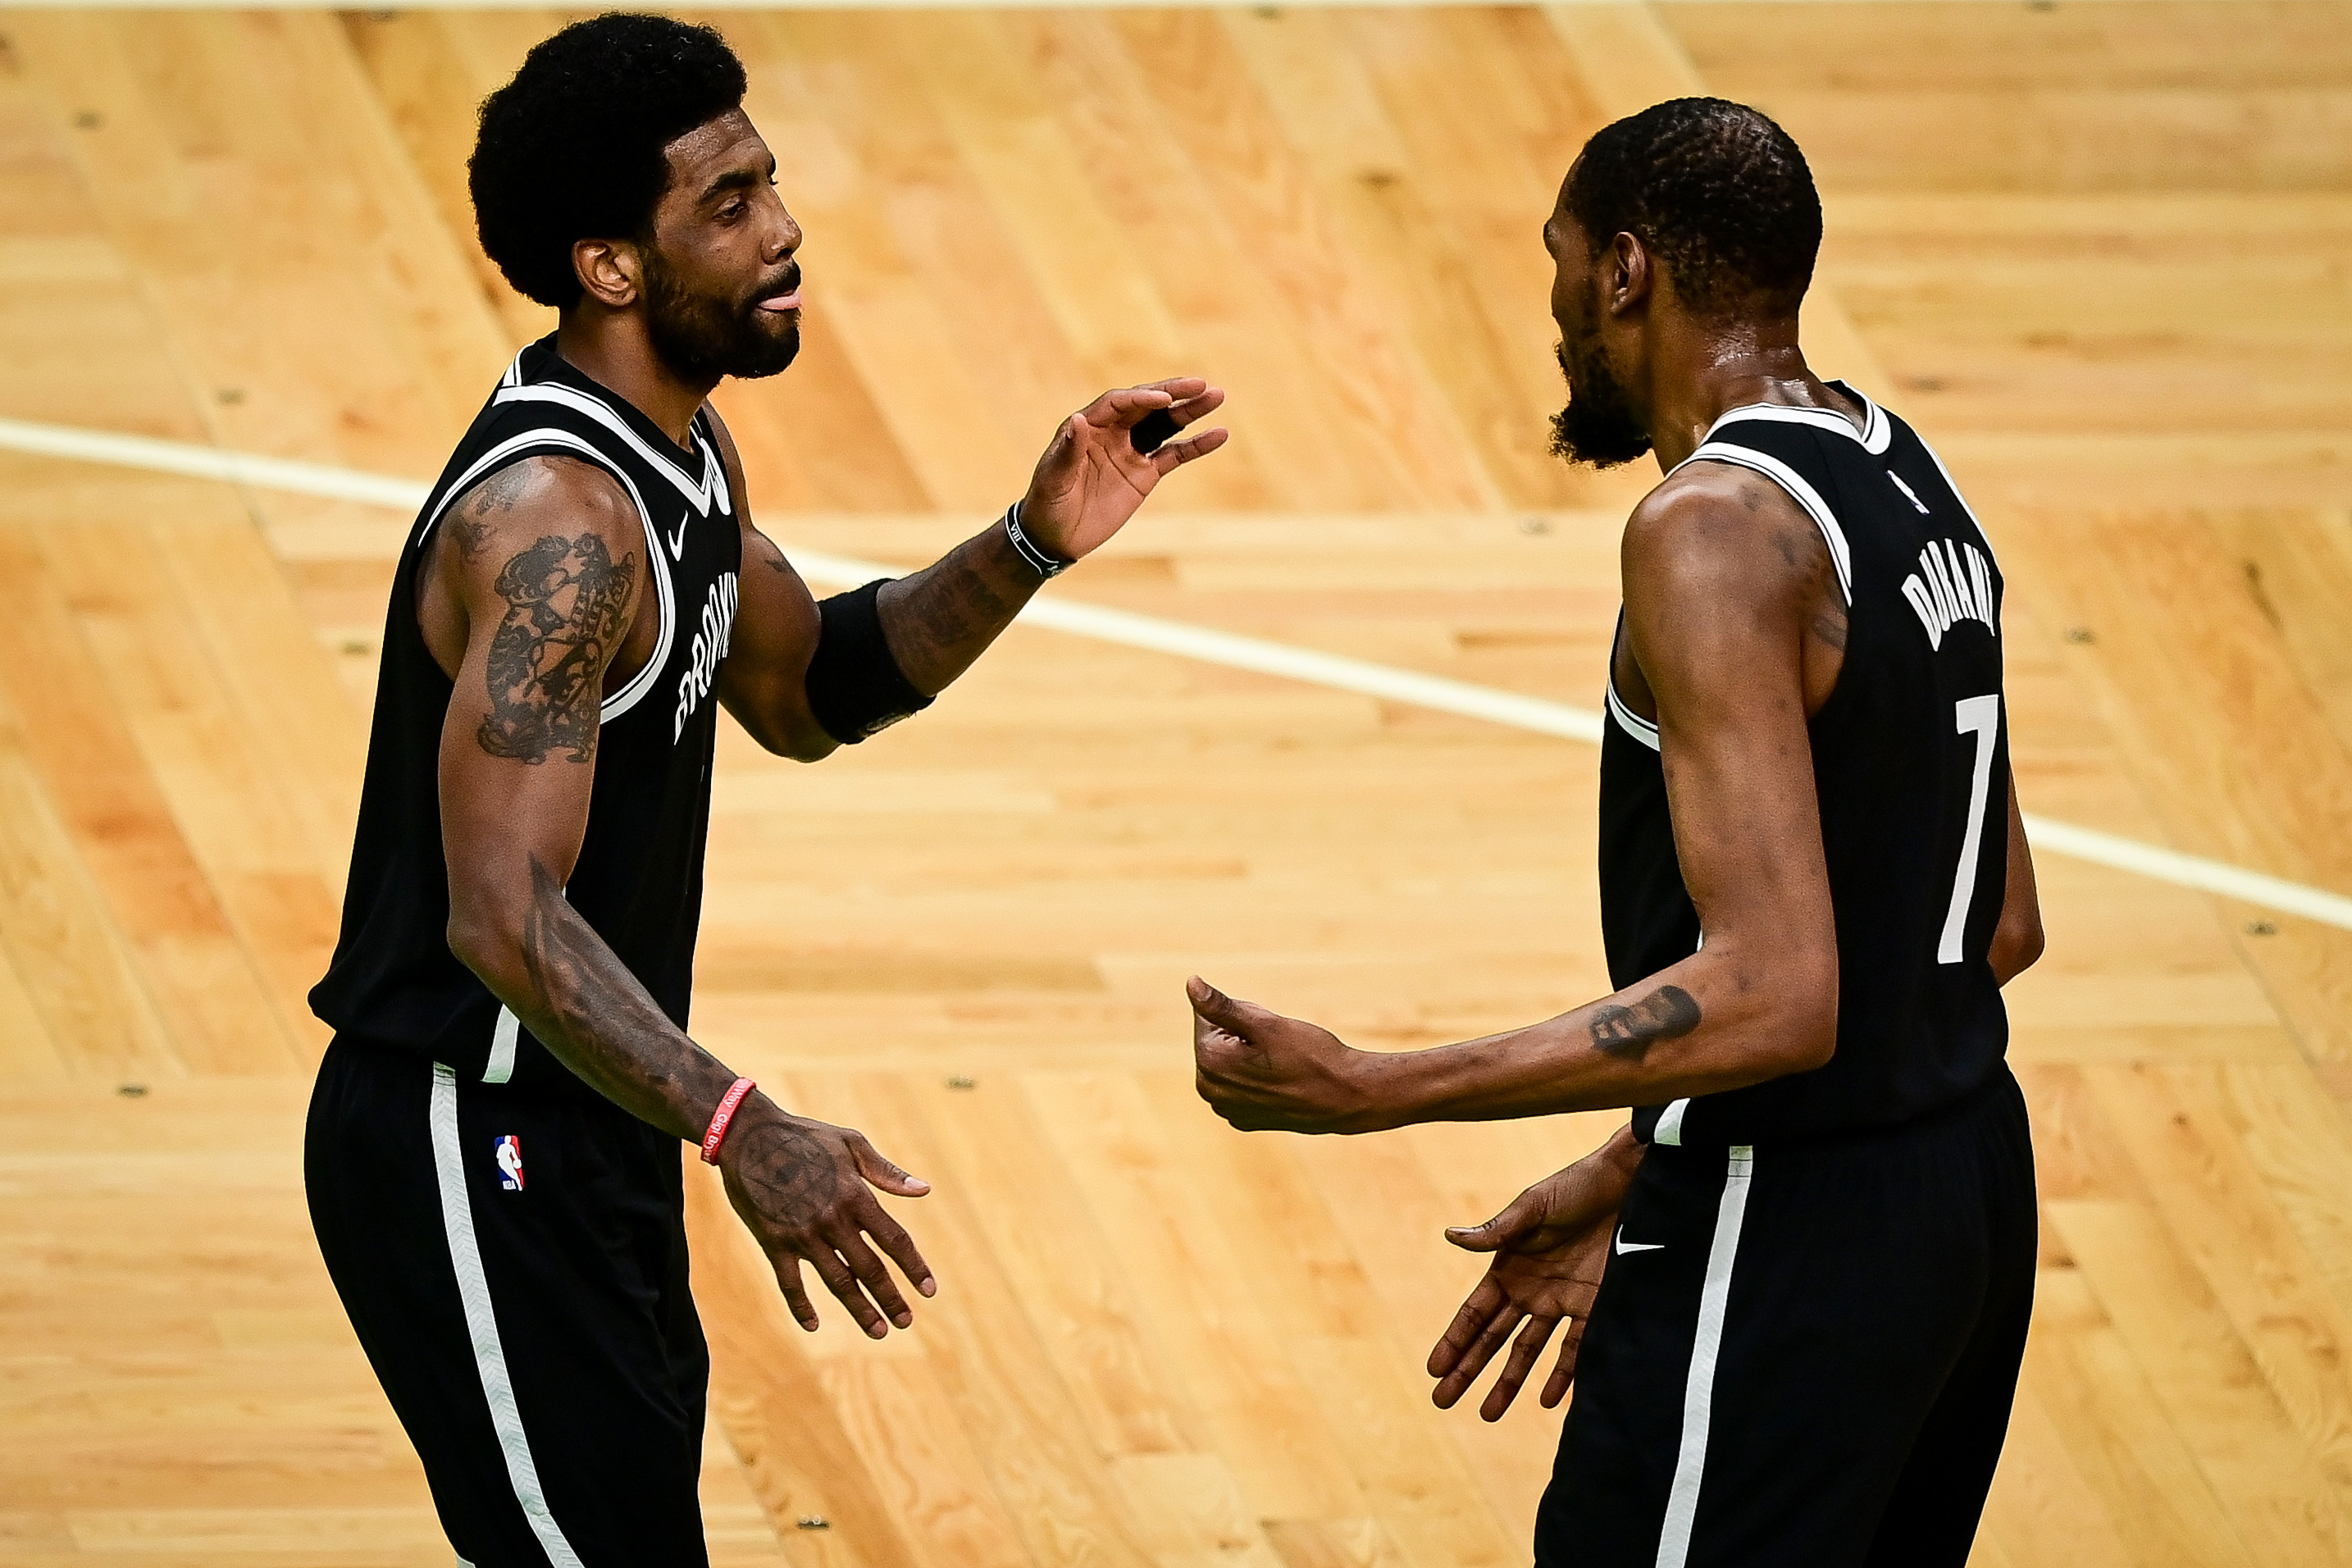 Brooklyn Nets stars Kyrie Irving and Kevin Durant celebrate during a game against the Boston Celtics in the 2021 NBA Playoffs